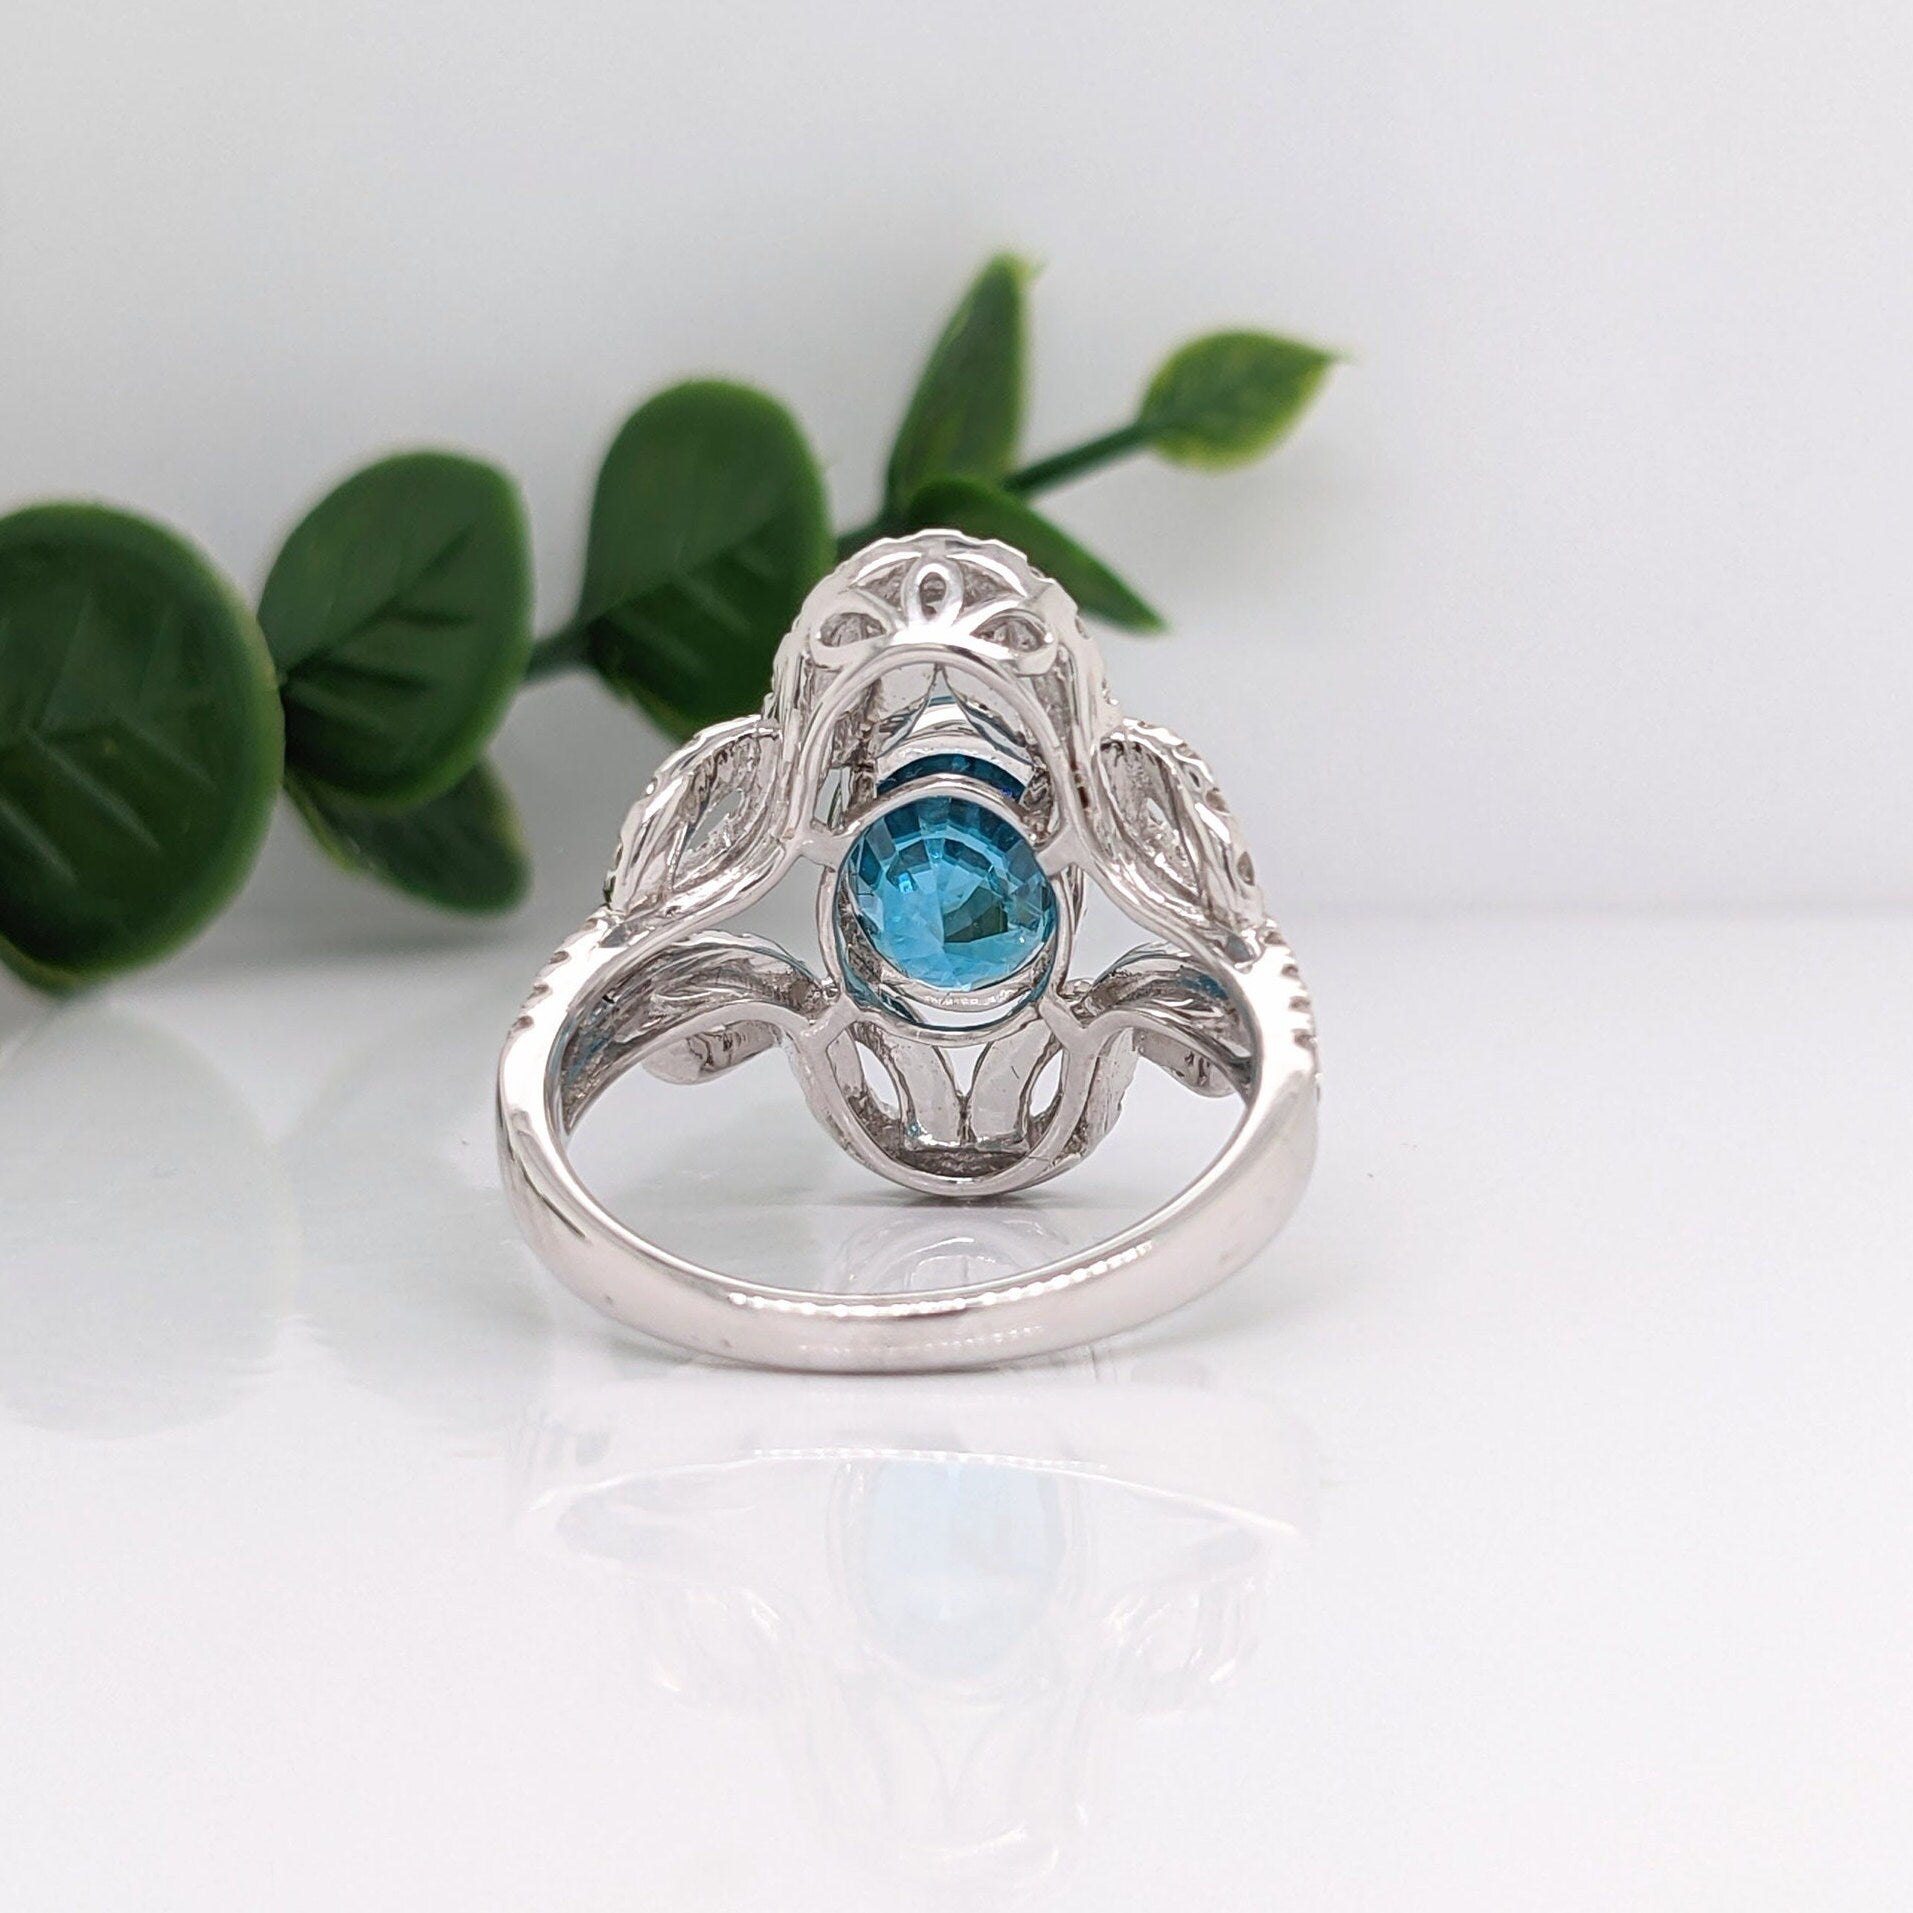 Sparkling Blue Zircon Ring in Solid 14K White Gold w Intricate Pave Diamond Design | Oval 9.5x7.5mm | Art Deco Ring | December Birthstone